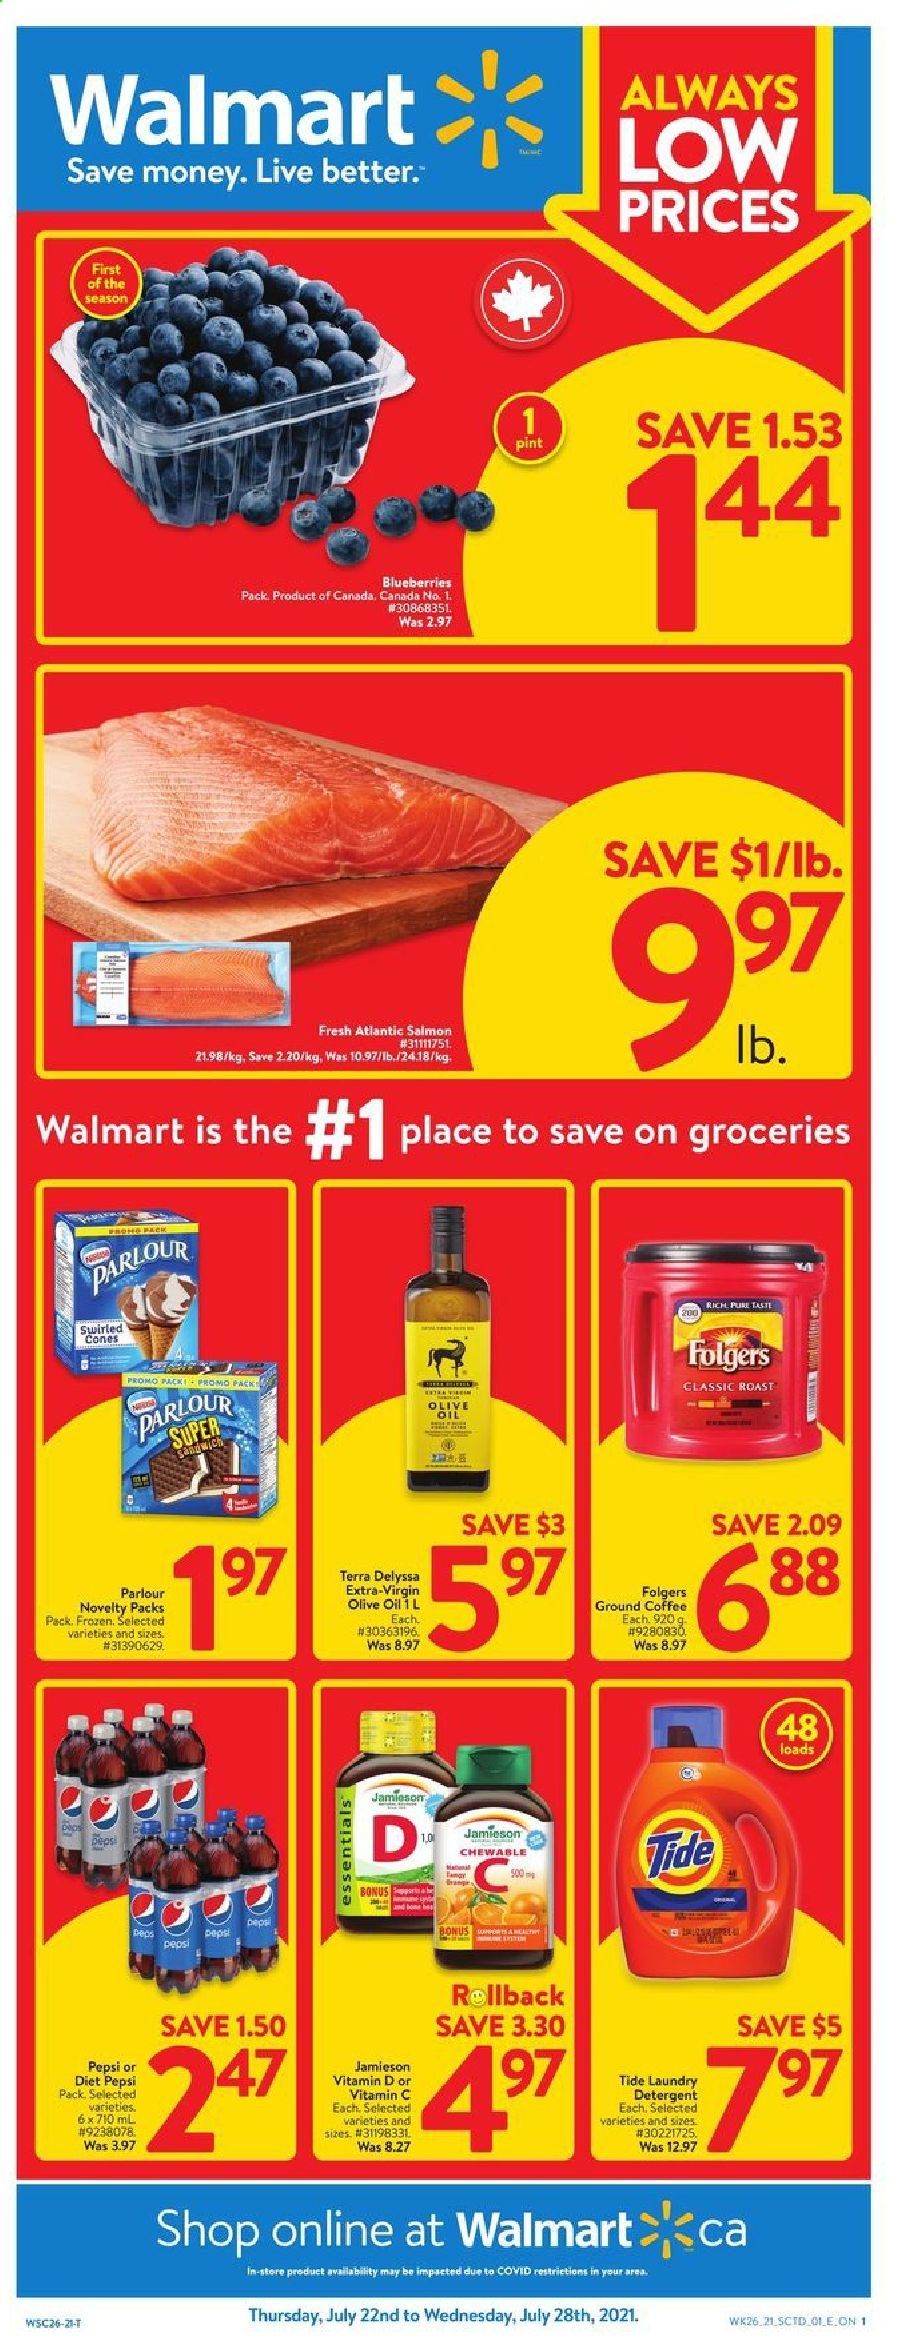 thumbnail - Walmart Flyer - July 22, 2021 - July 28, 2021 - Sales products - blueberries, salmon, olive oil, oil, Pepsi, Diet Pepsi, coffee, Folgers, ground coffee, Tide, laundry detergent, vitamin c. Page 1.